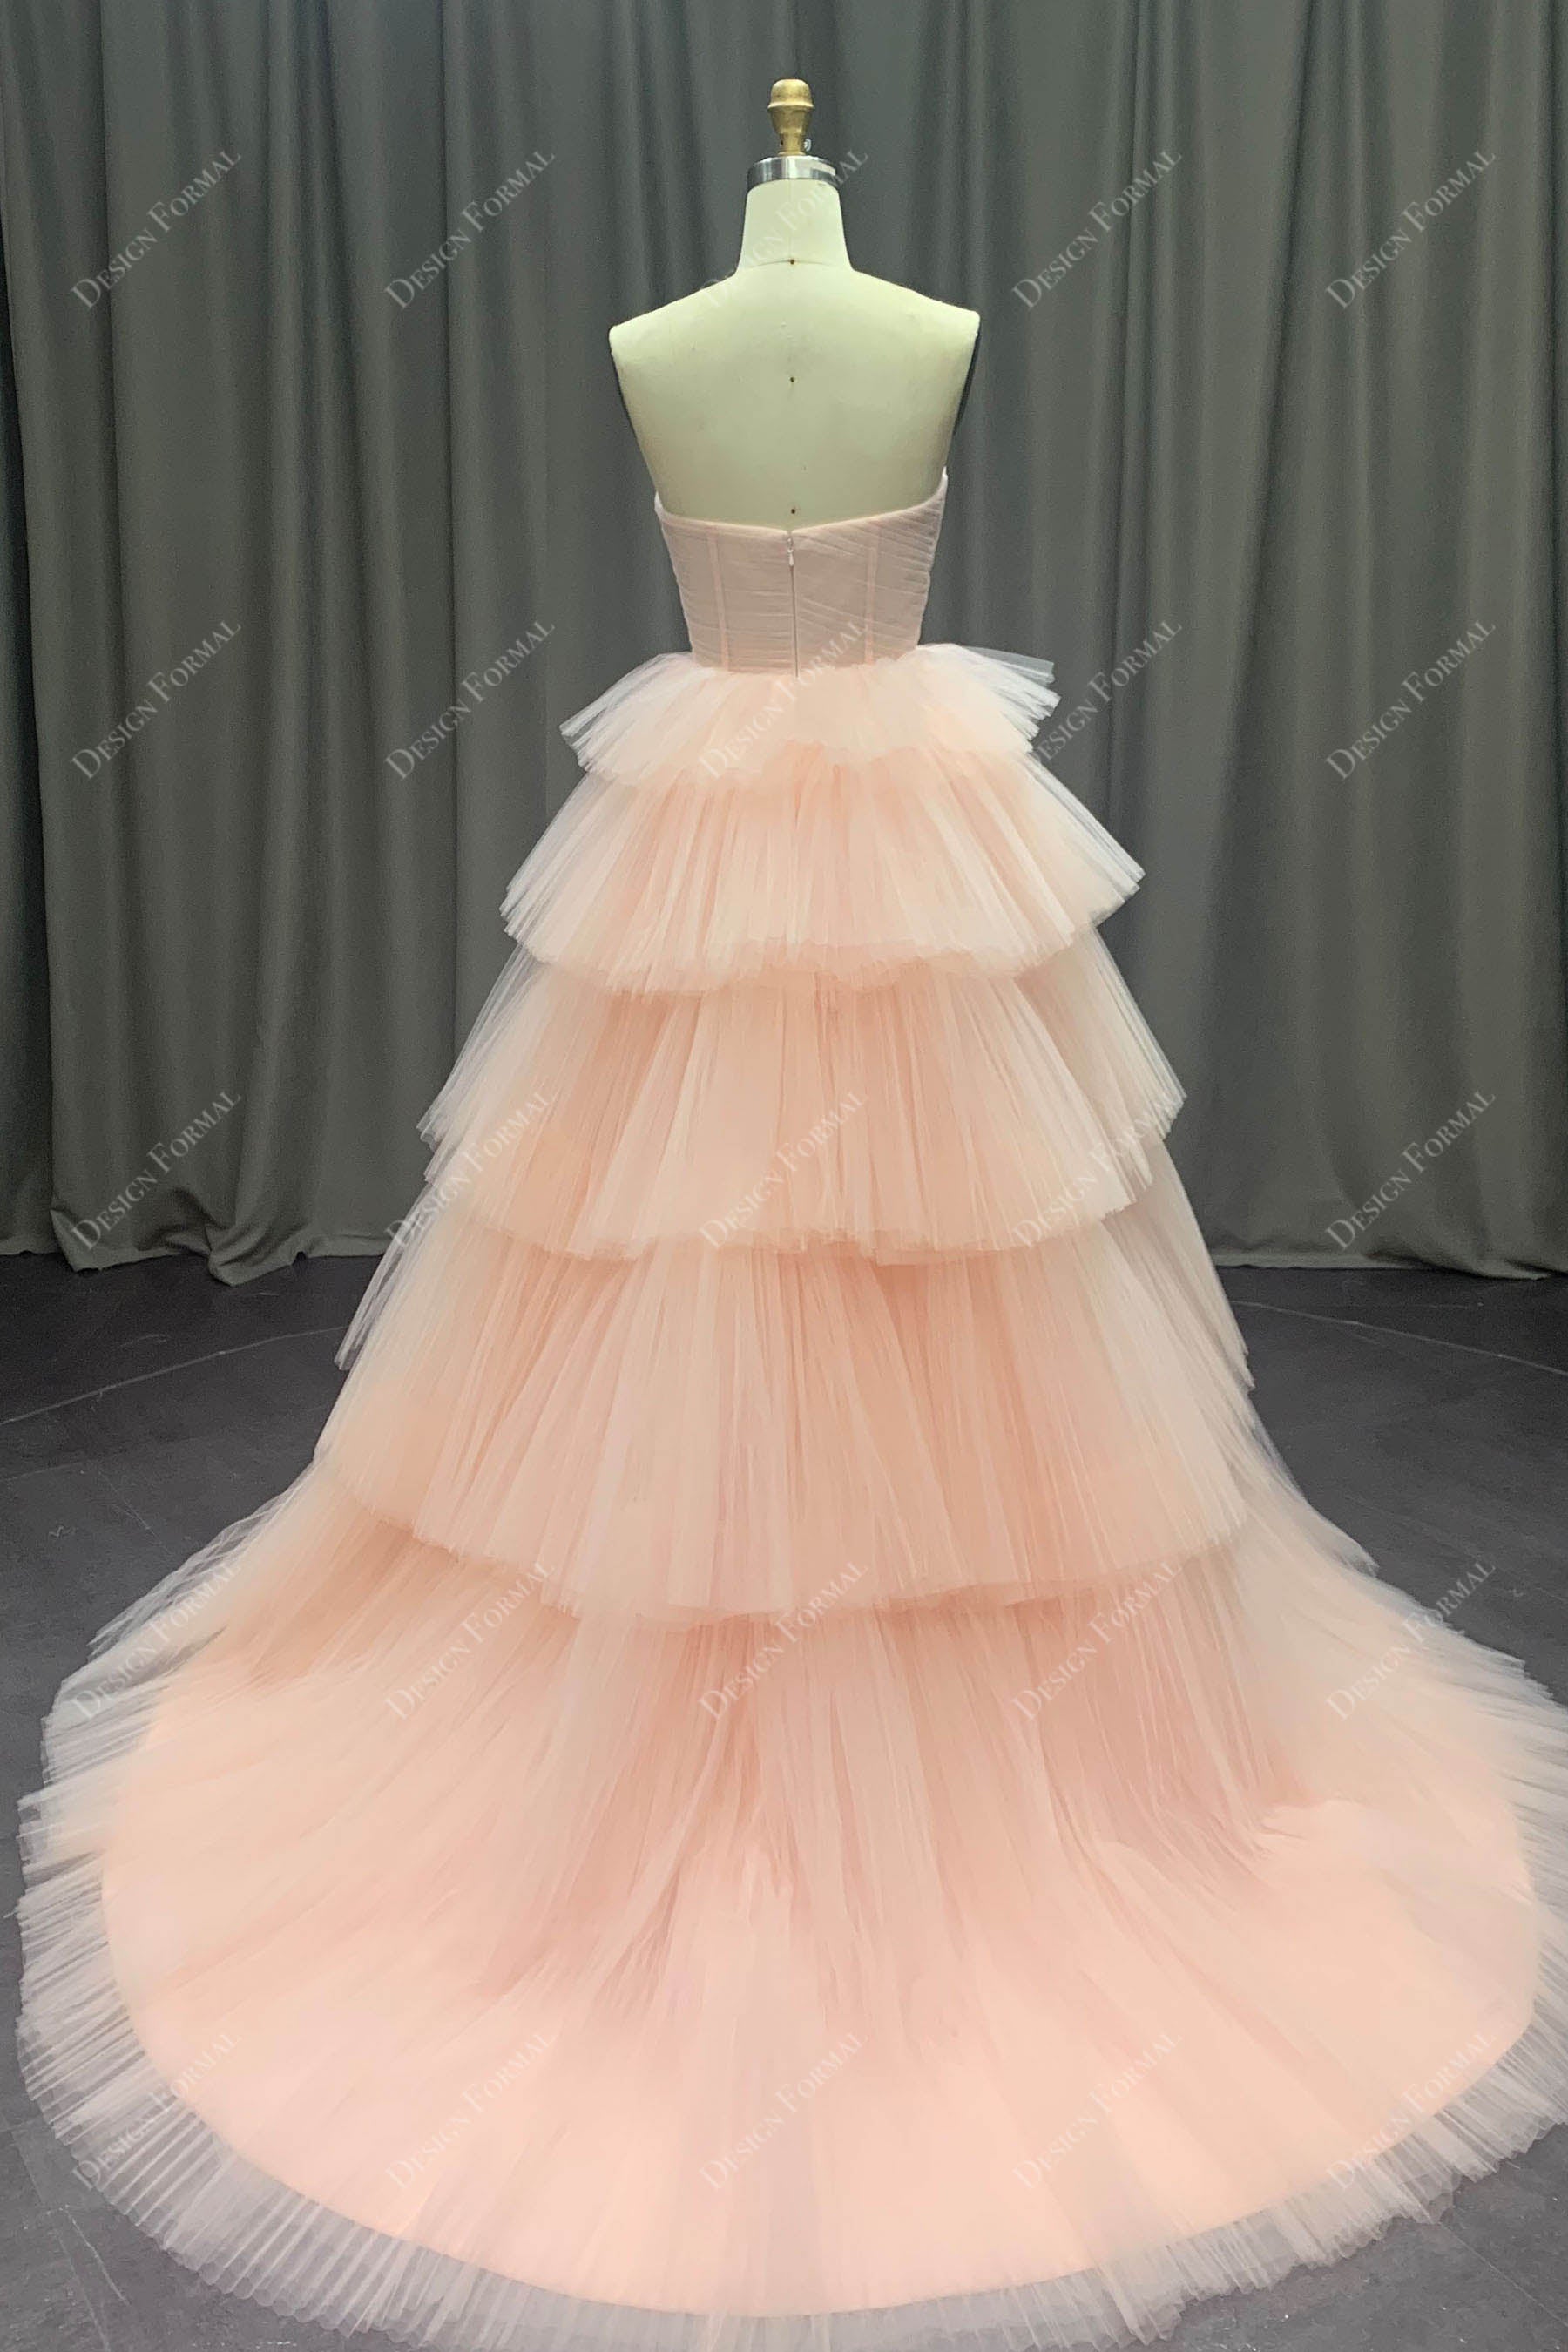 Blushing Pink Designer Tiered Pleated Tulle Prom Bridal Gown